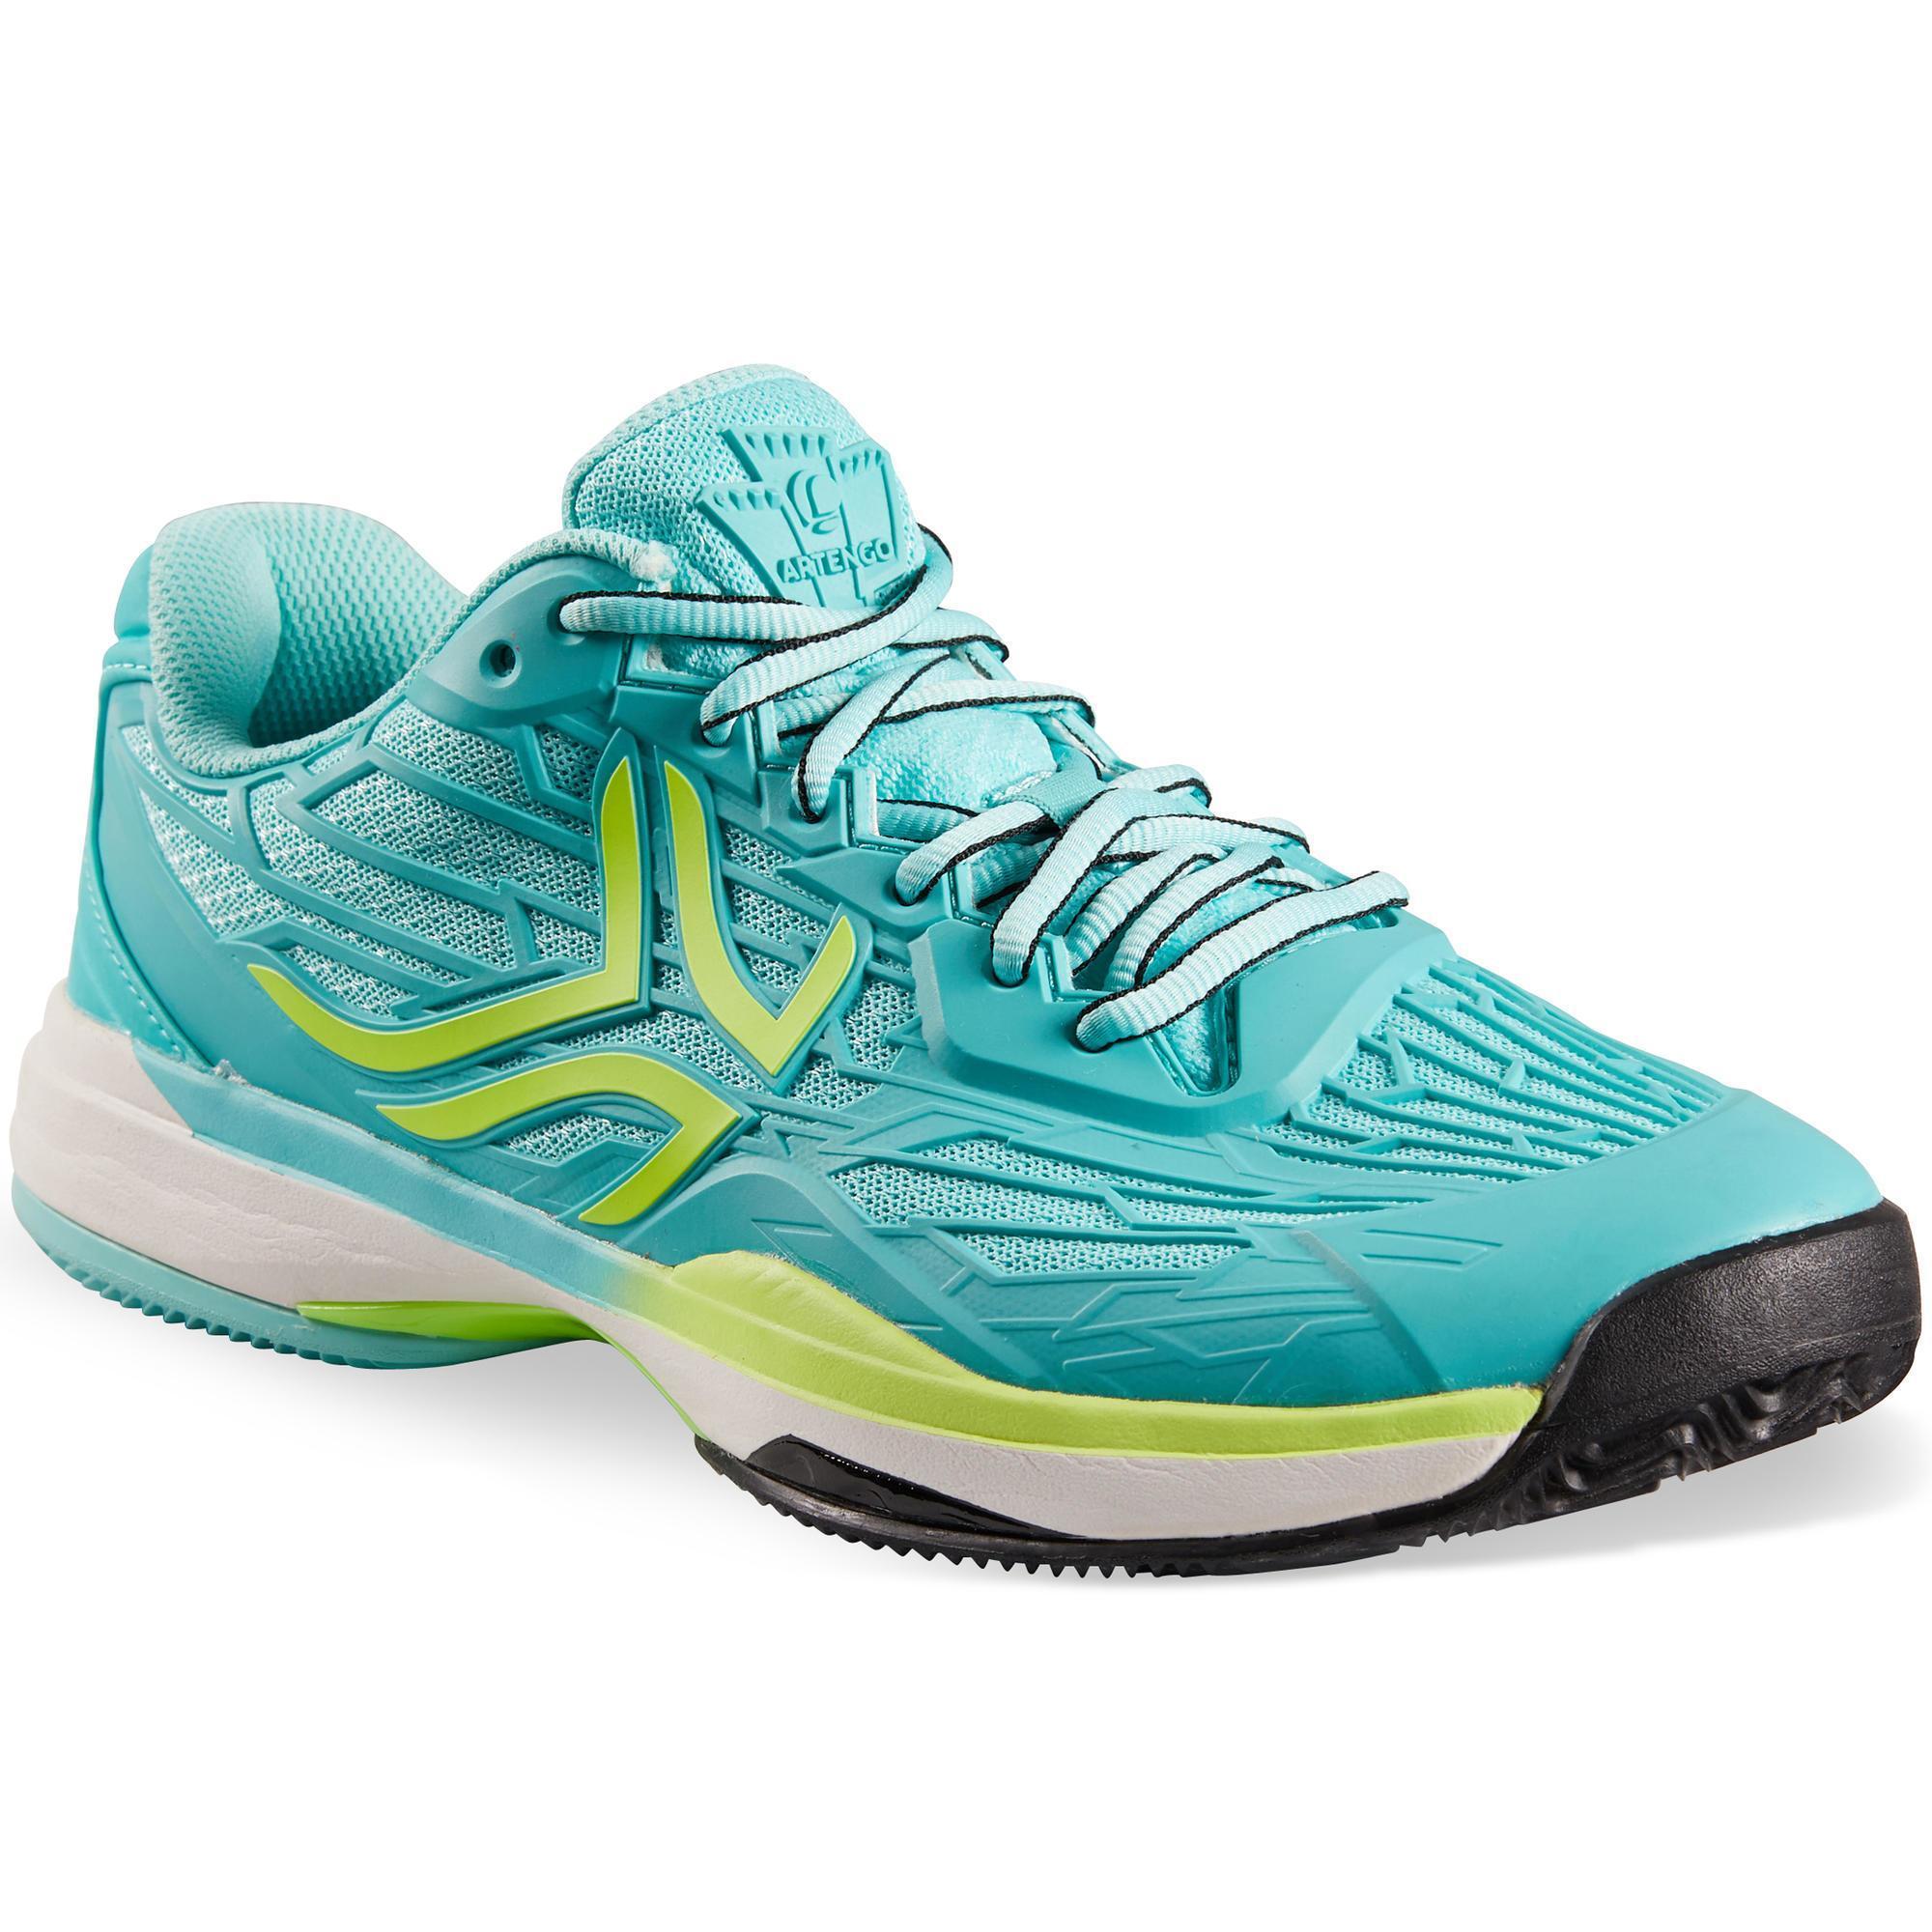 TS990 Women's Tennis Shoes For Clay Courts - Turquoise ...